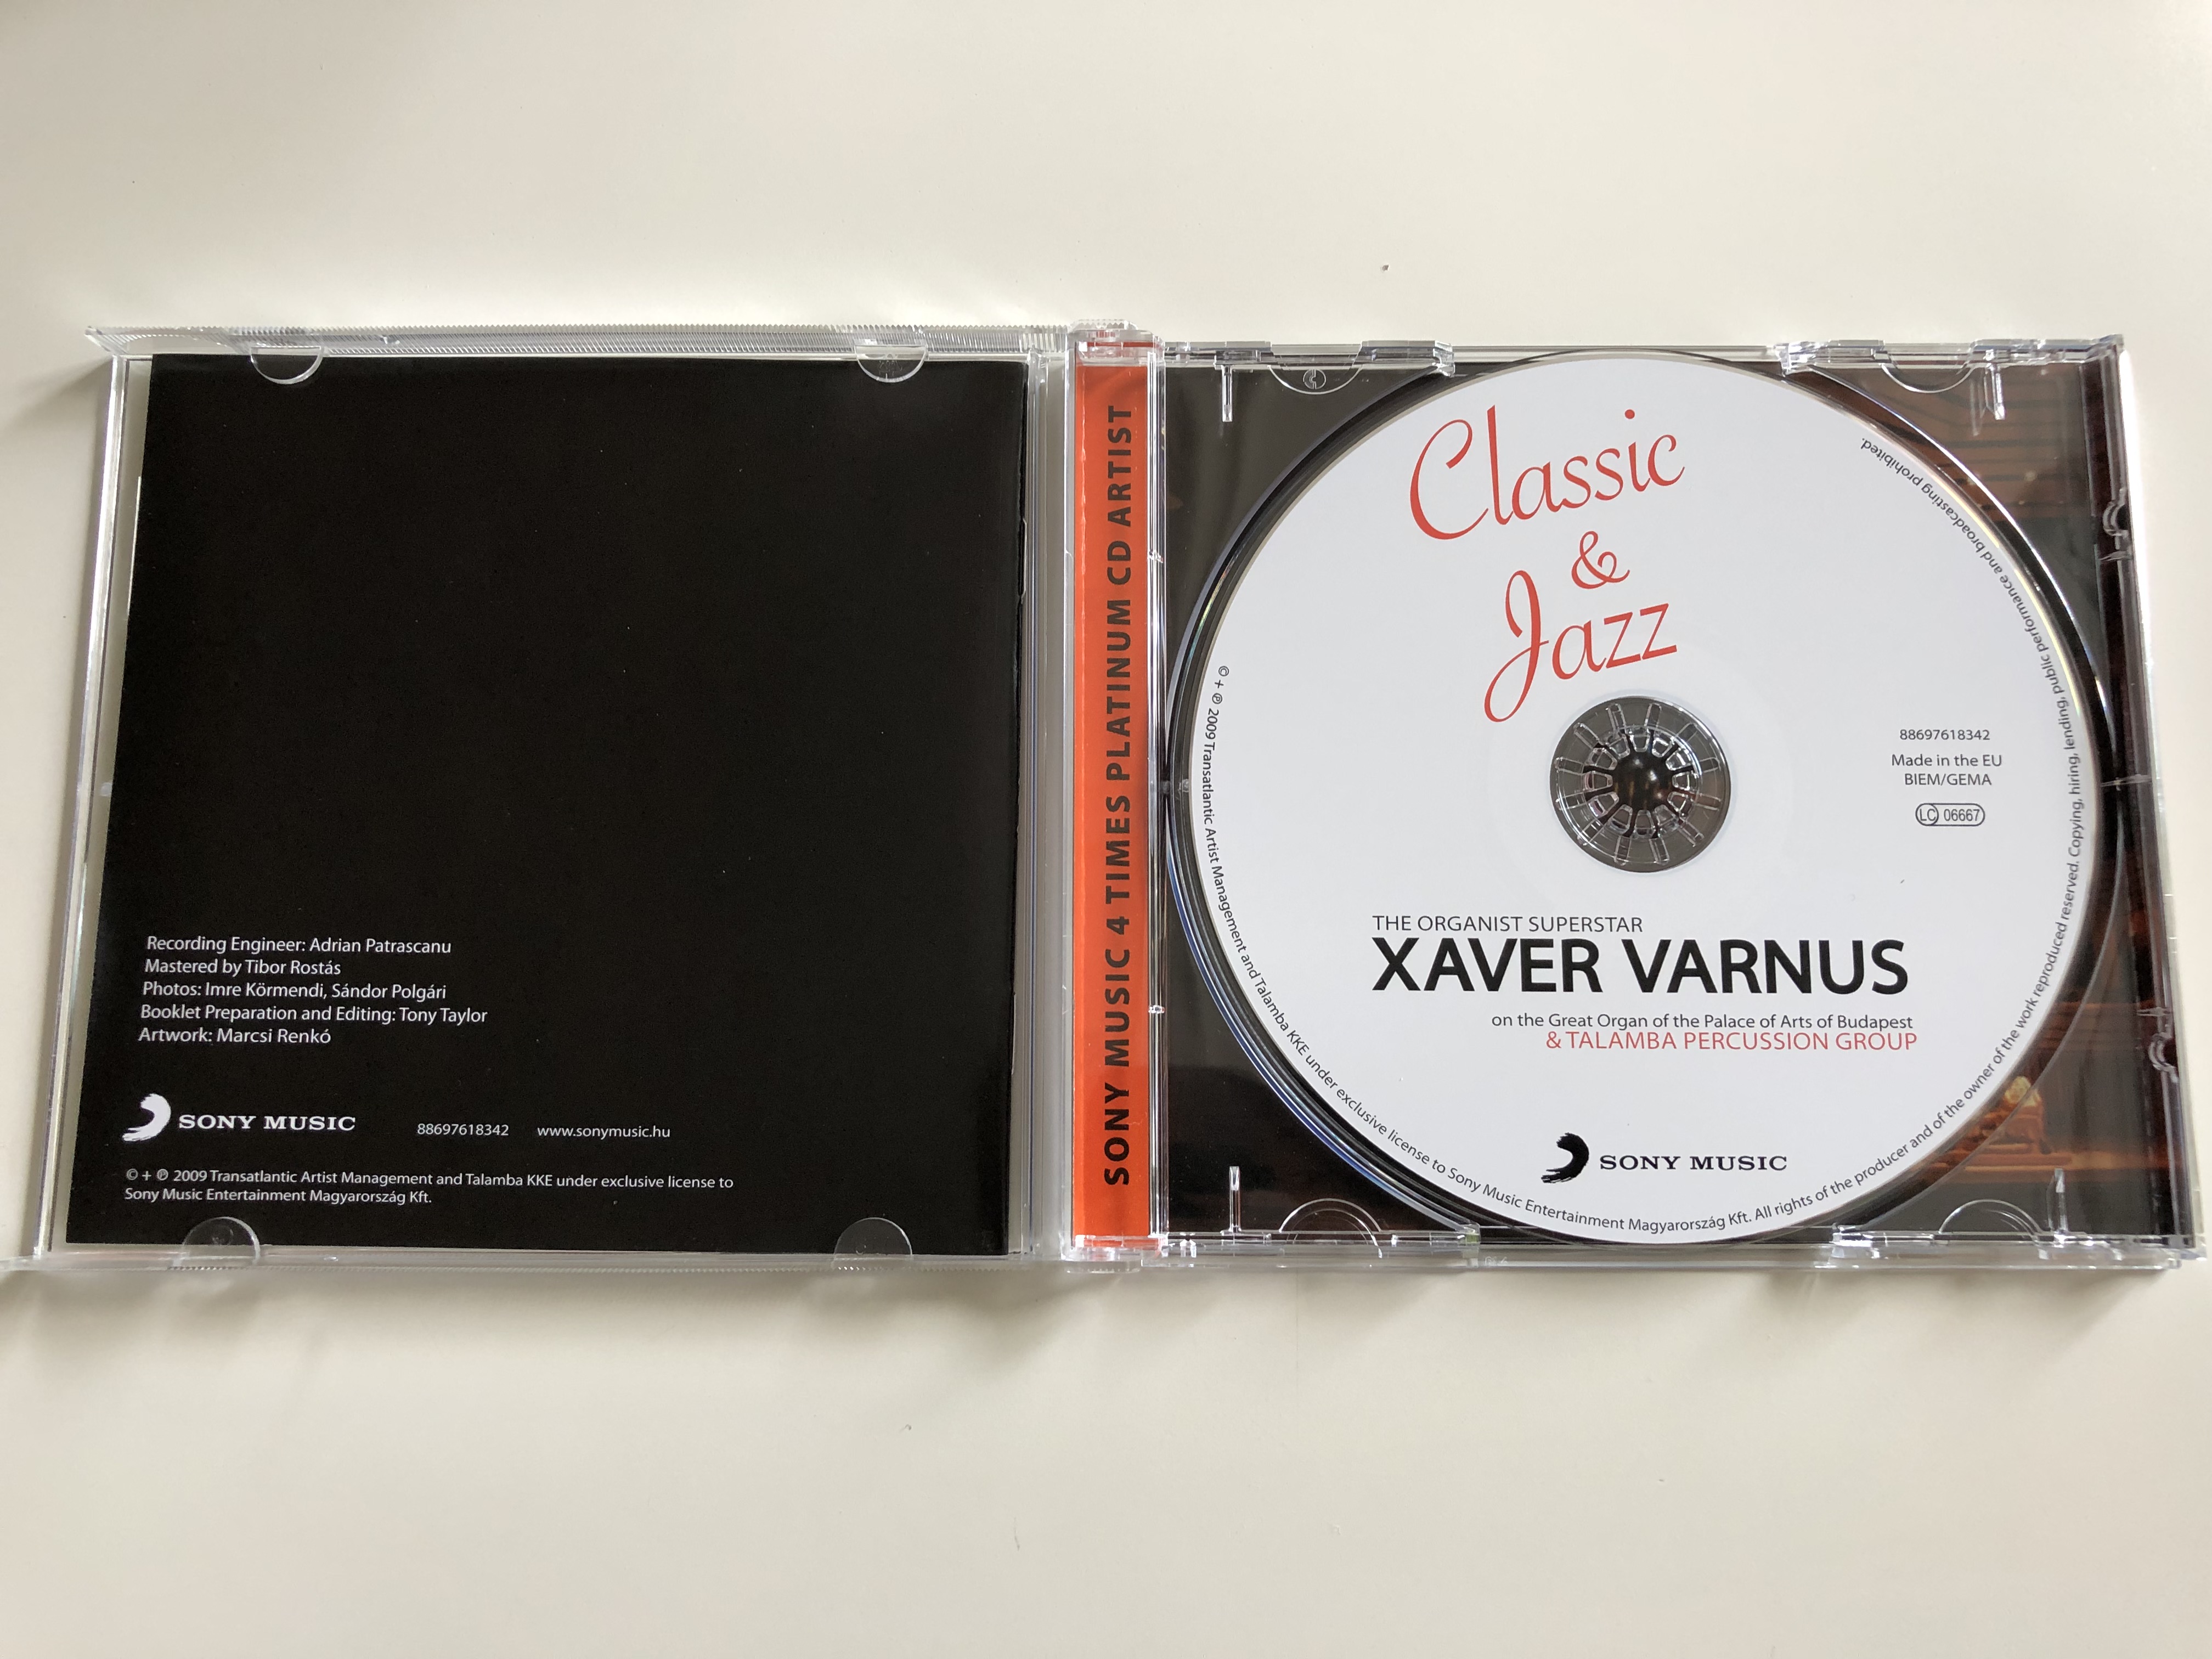 xaver-varnus-classic-jazz-the-organist-superstar-on-the-great-organ-of-the-palace-of-arts-of-budapest-talamba-percussion-group-sony-music-audio-cd-2009-5-.jpg